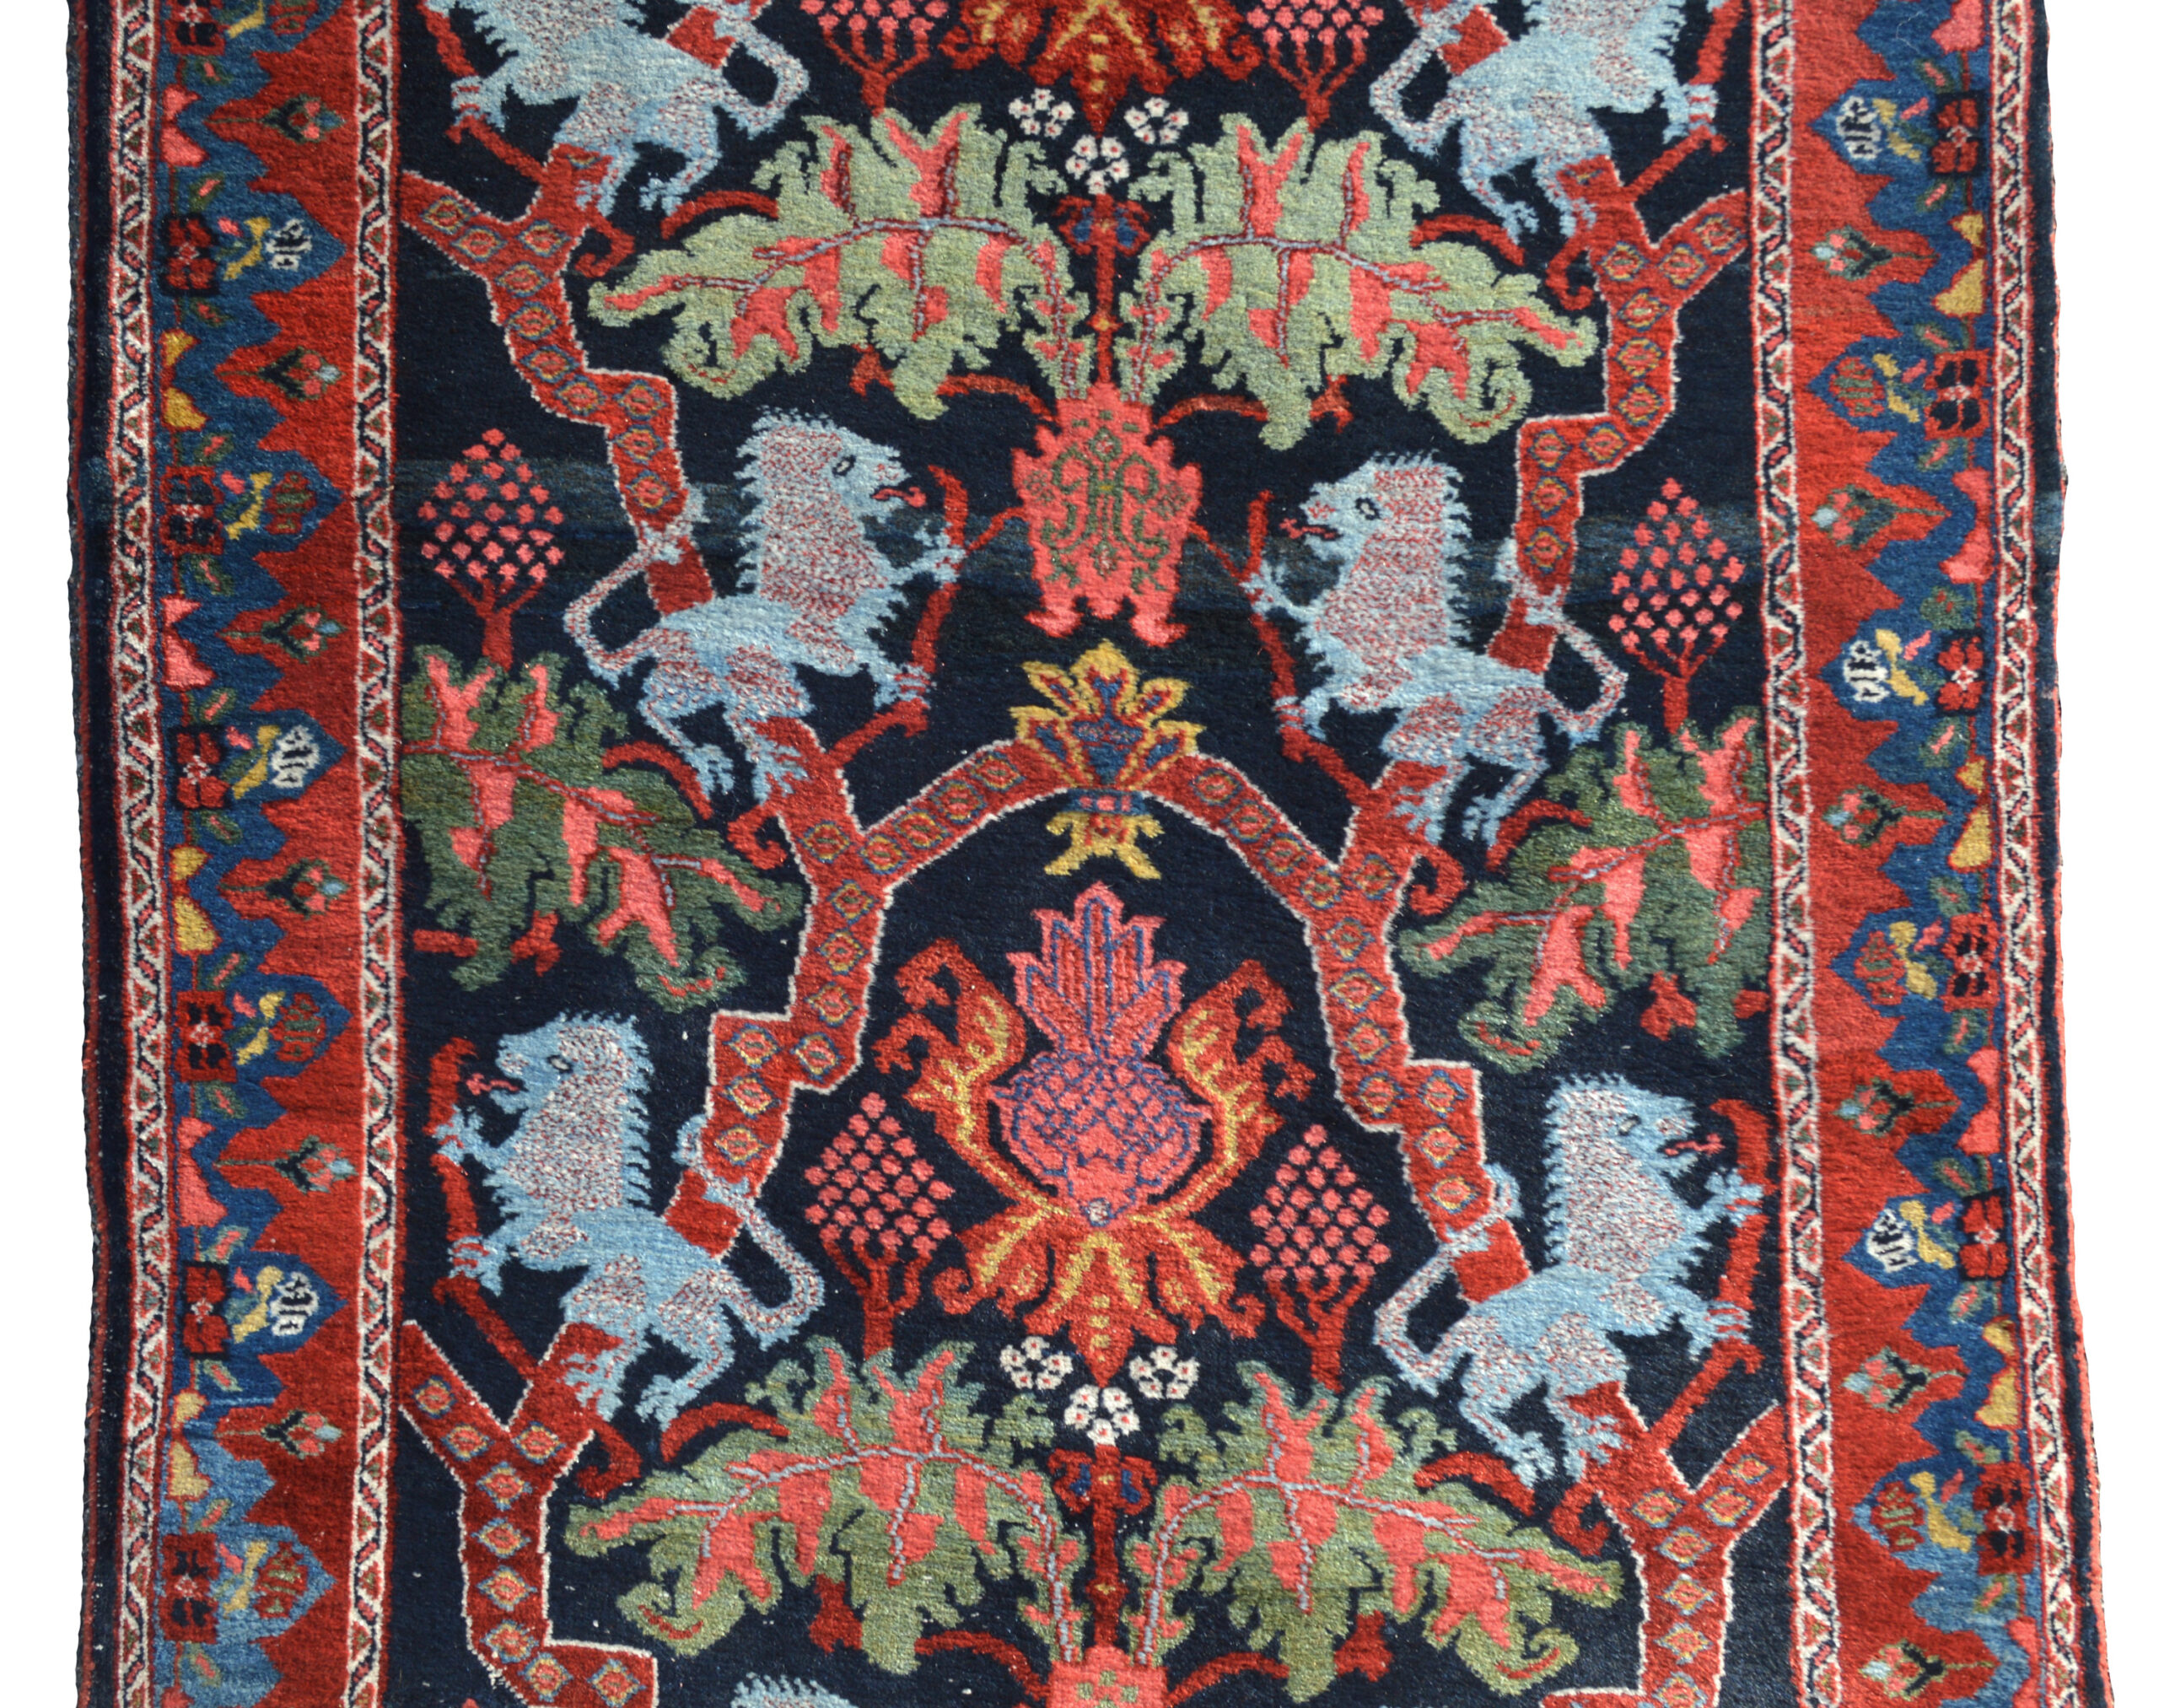 Detail of the Lions, leaves, floral forms and strapwork design from an antique Persian Bidjar Lion Rug runner - Douglas Stock Gallery, antique runner rugs Boston,MA area, Oriental runner rugs